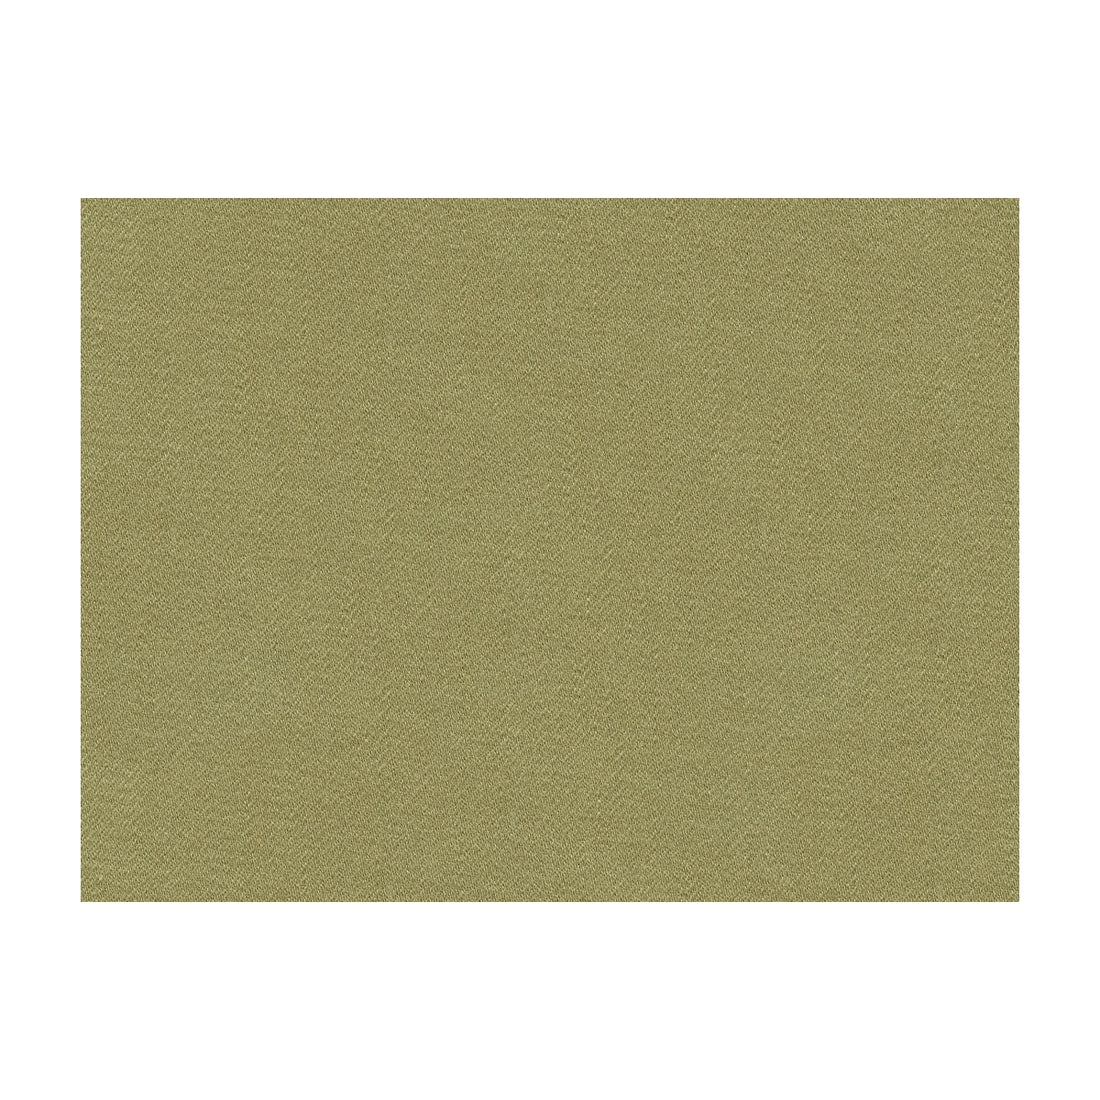 Fyvie Wool Satin fabric in khaki color - pattern BR-89768.459.0 - by Brunschwig &amp; Fils